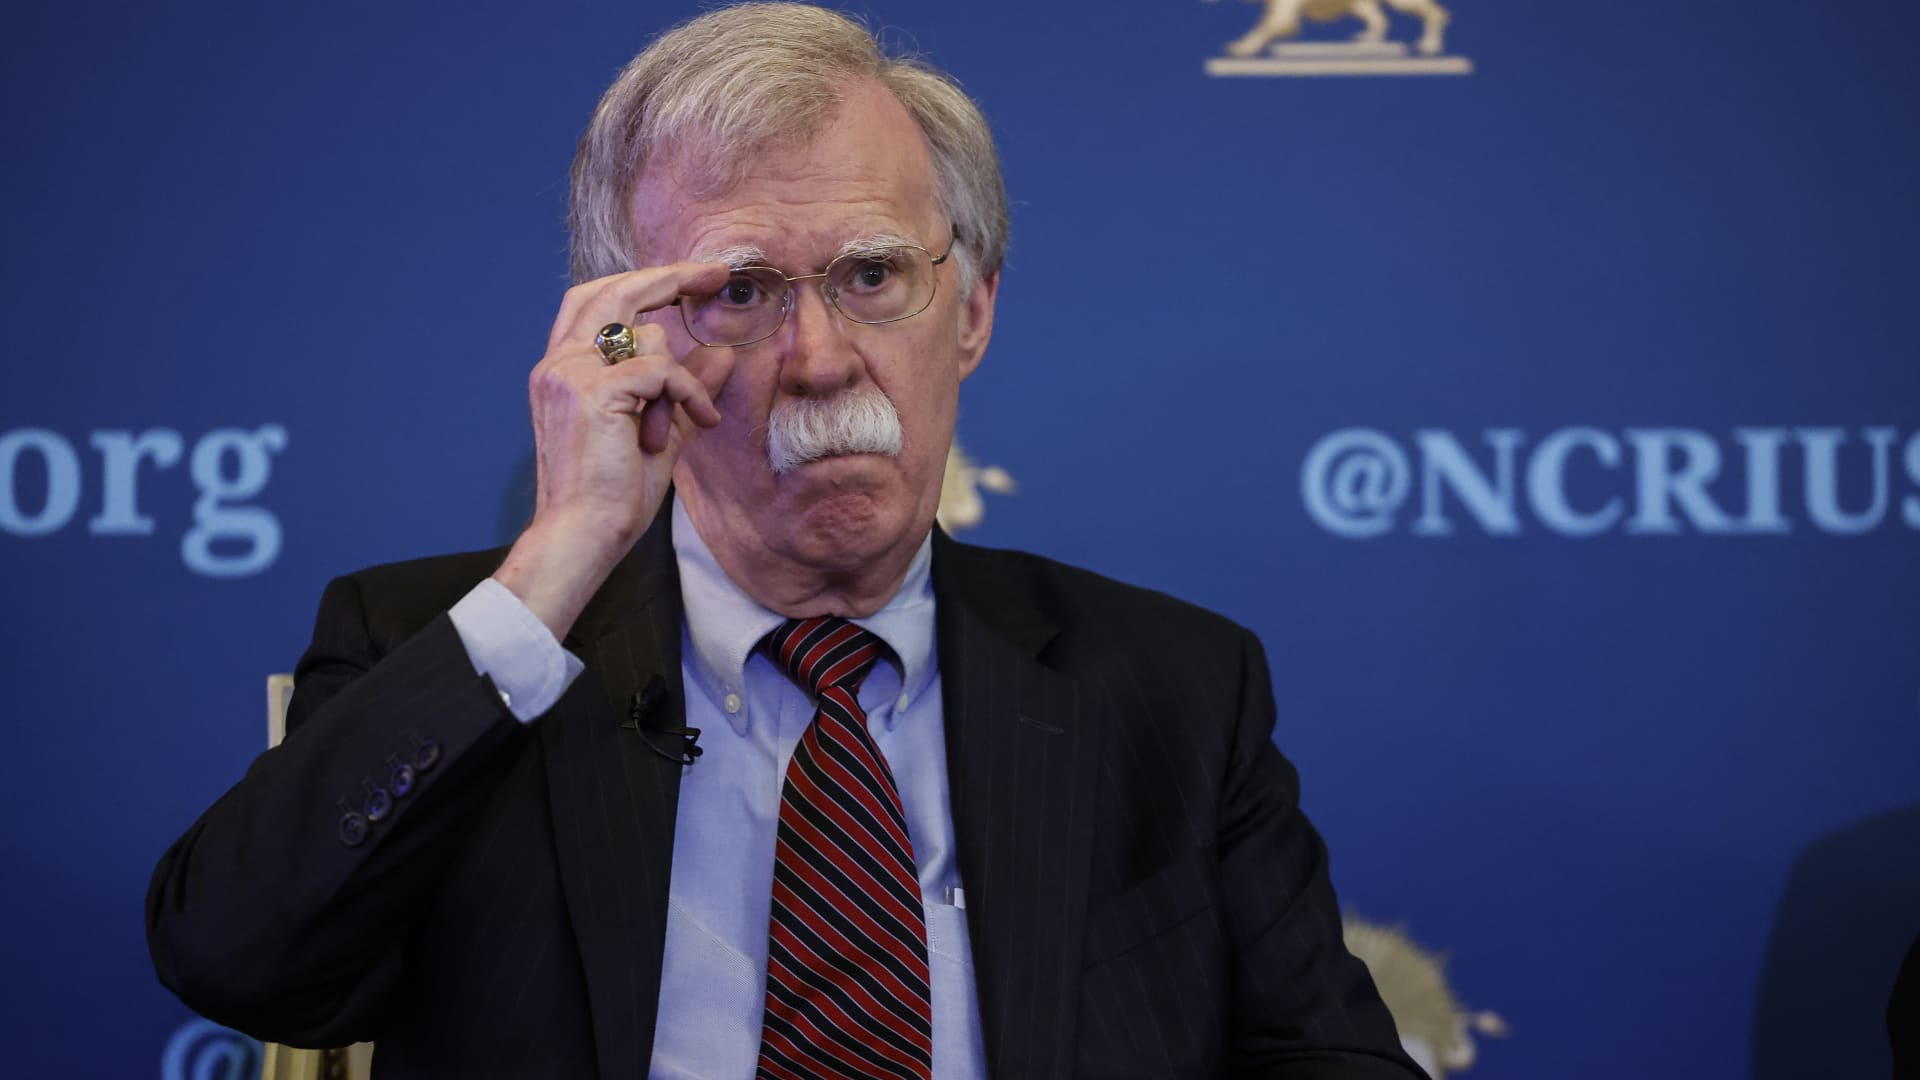 John Bolton says Biden administration is making a ‘understanding mistake’ in pursuing Iran nuclear deal